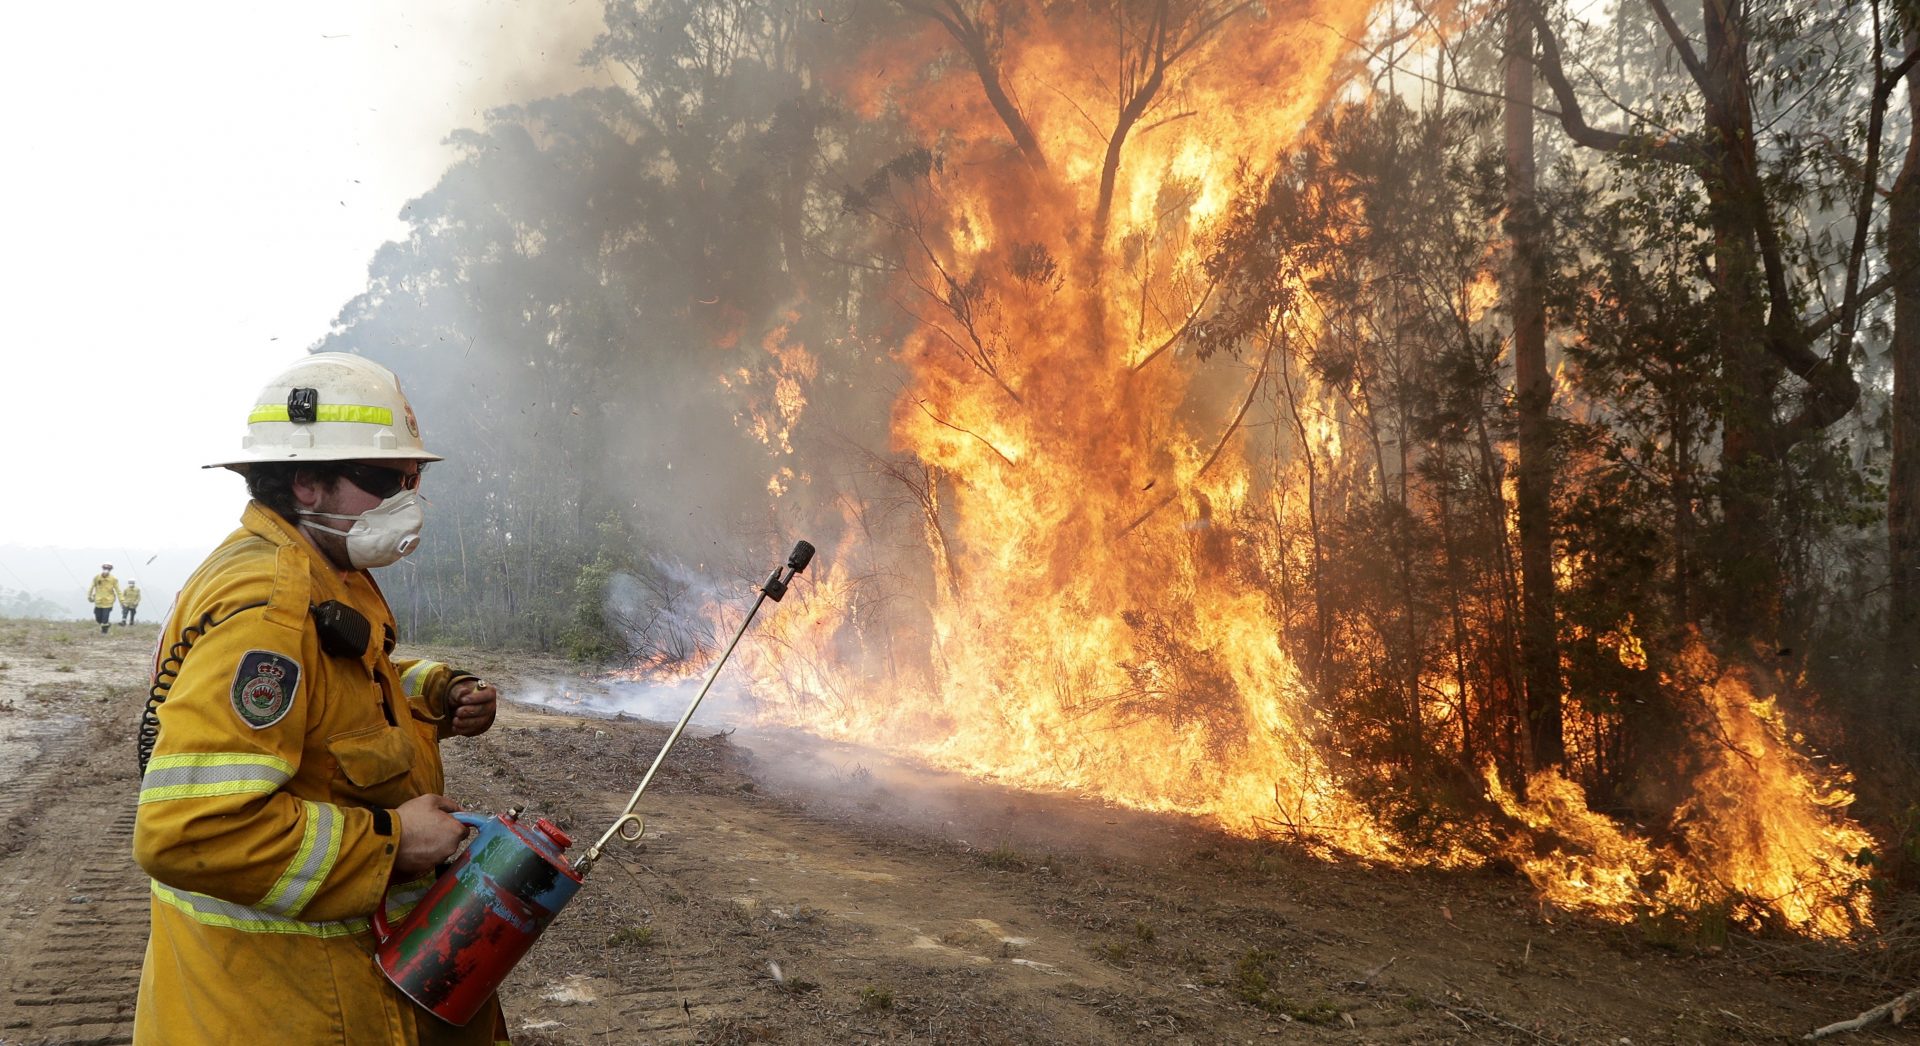 A firefighters backs away from the flames after lighting a controlled burn near Tomerong, Australia, Wednesday, Jan. 8, 2020, in an effort to contain a larger fire nearby. Around 2,300 firefighters in New South Wales state were making the most of relatively benign conditions by frantically consolidating containment lines around more than 110 blazes and patrolling for lightning strikes, state Rural Fire Service Commissioner Shane Fitzsimmons said.